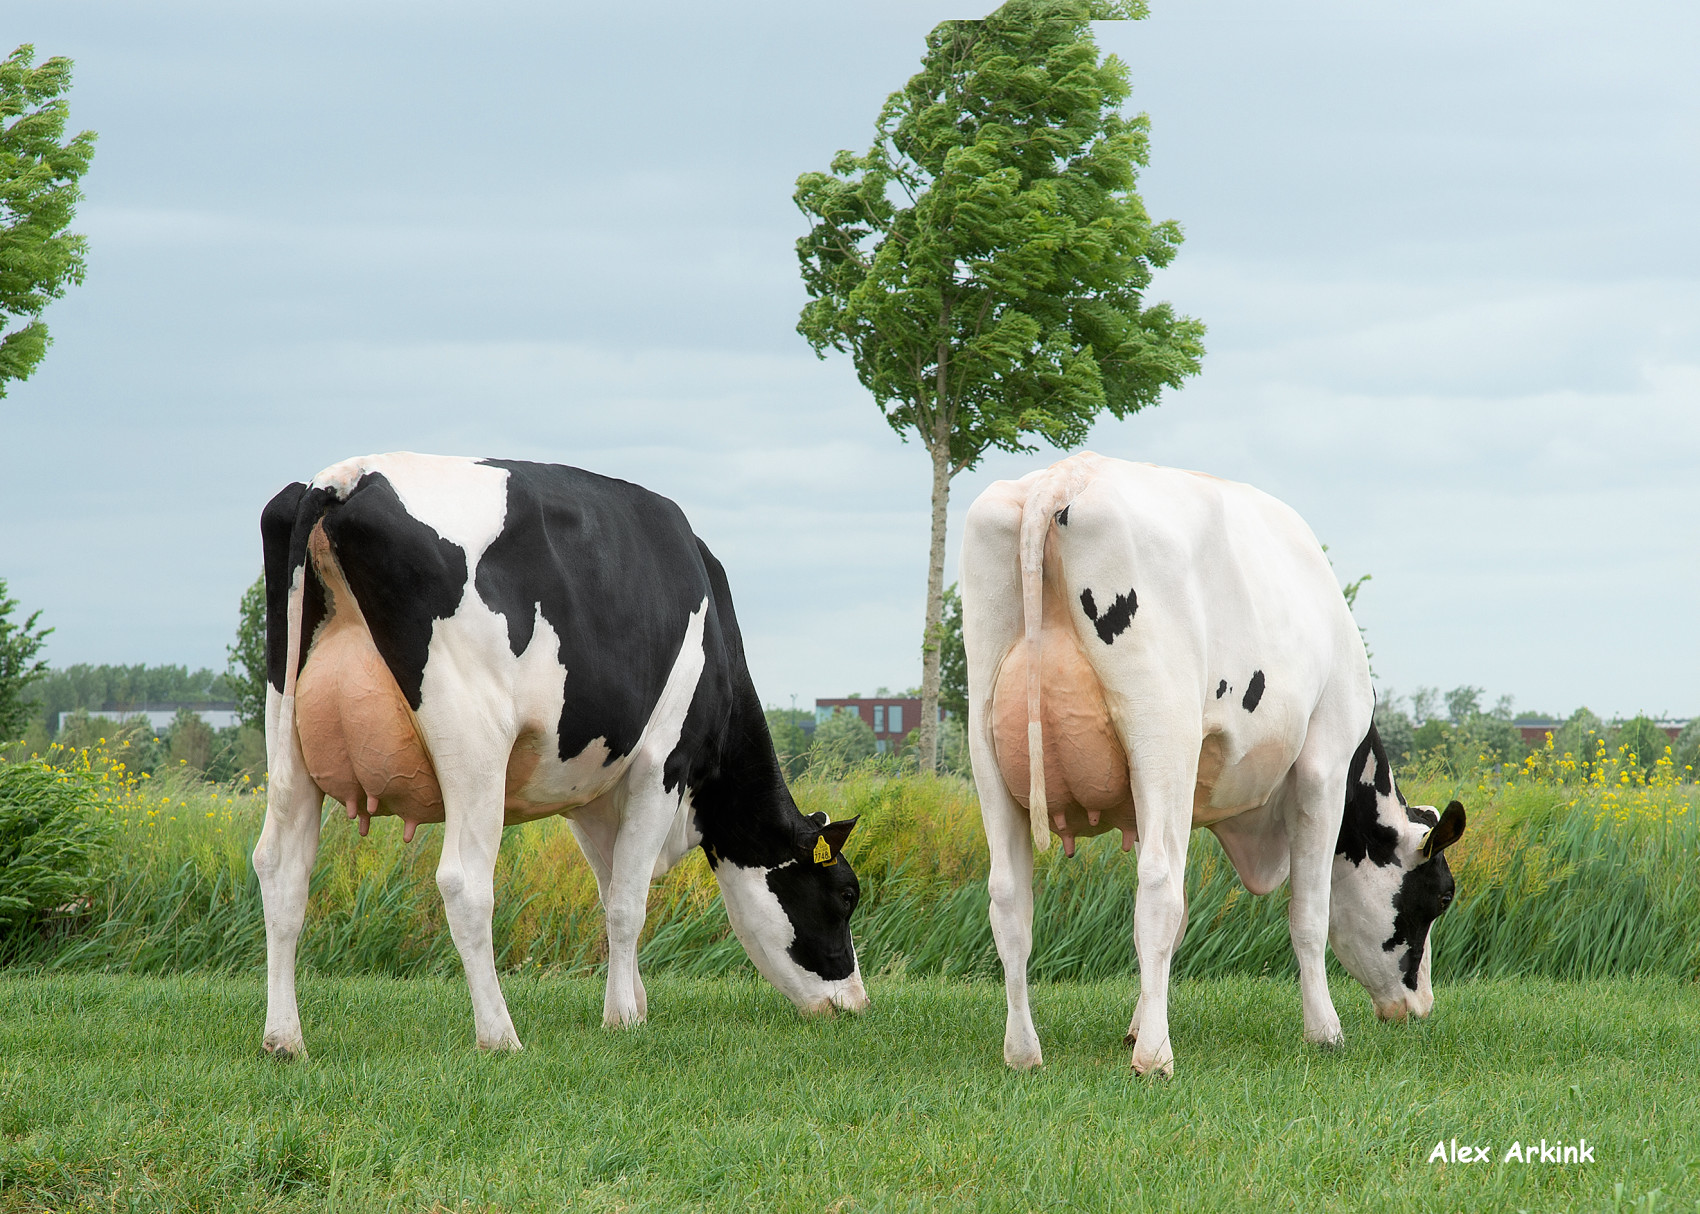 Daughters of Ranger, the most used sire in the financial year 2020-2021 at the Sturkenboom family’s farm in Schalkwijk